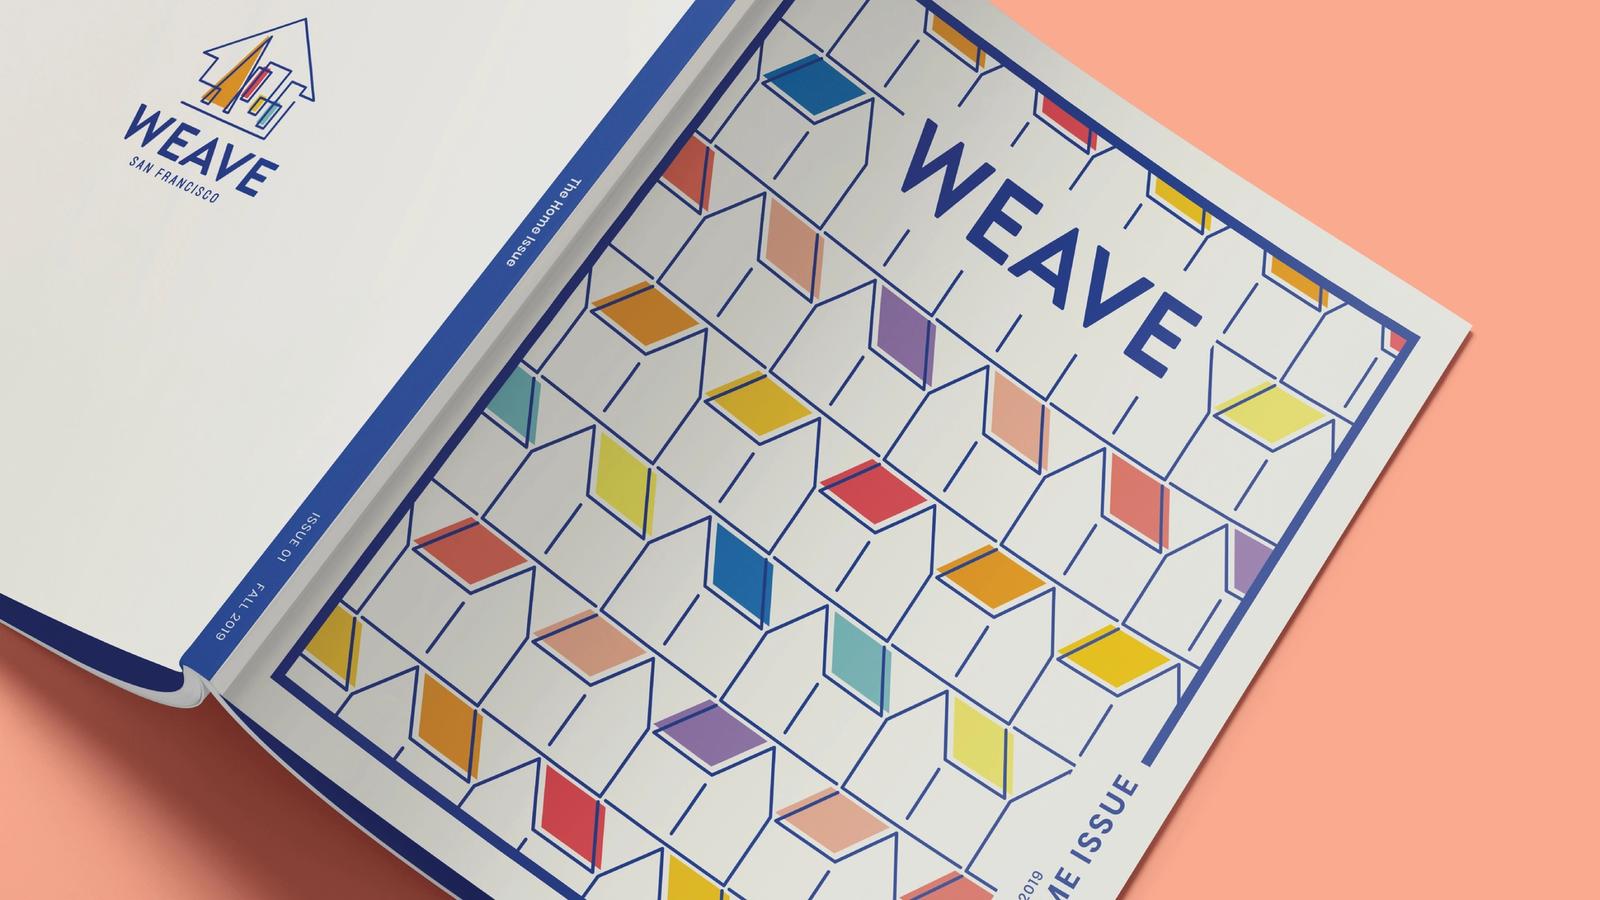 Weave // publication (MFA thesis project)